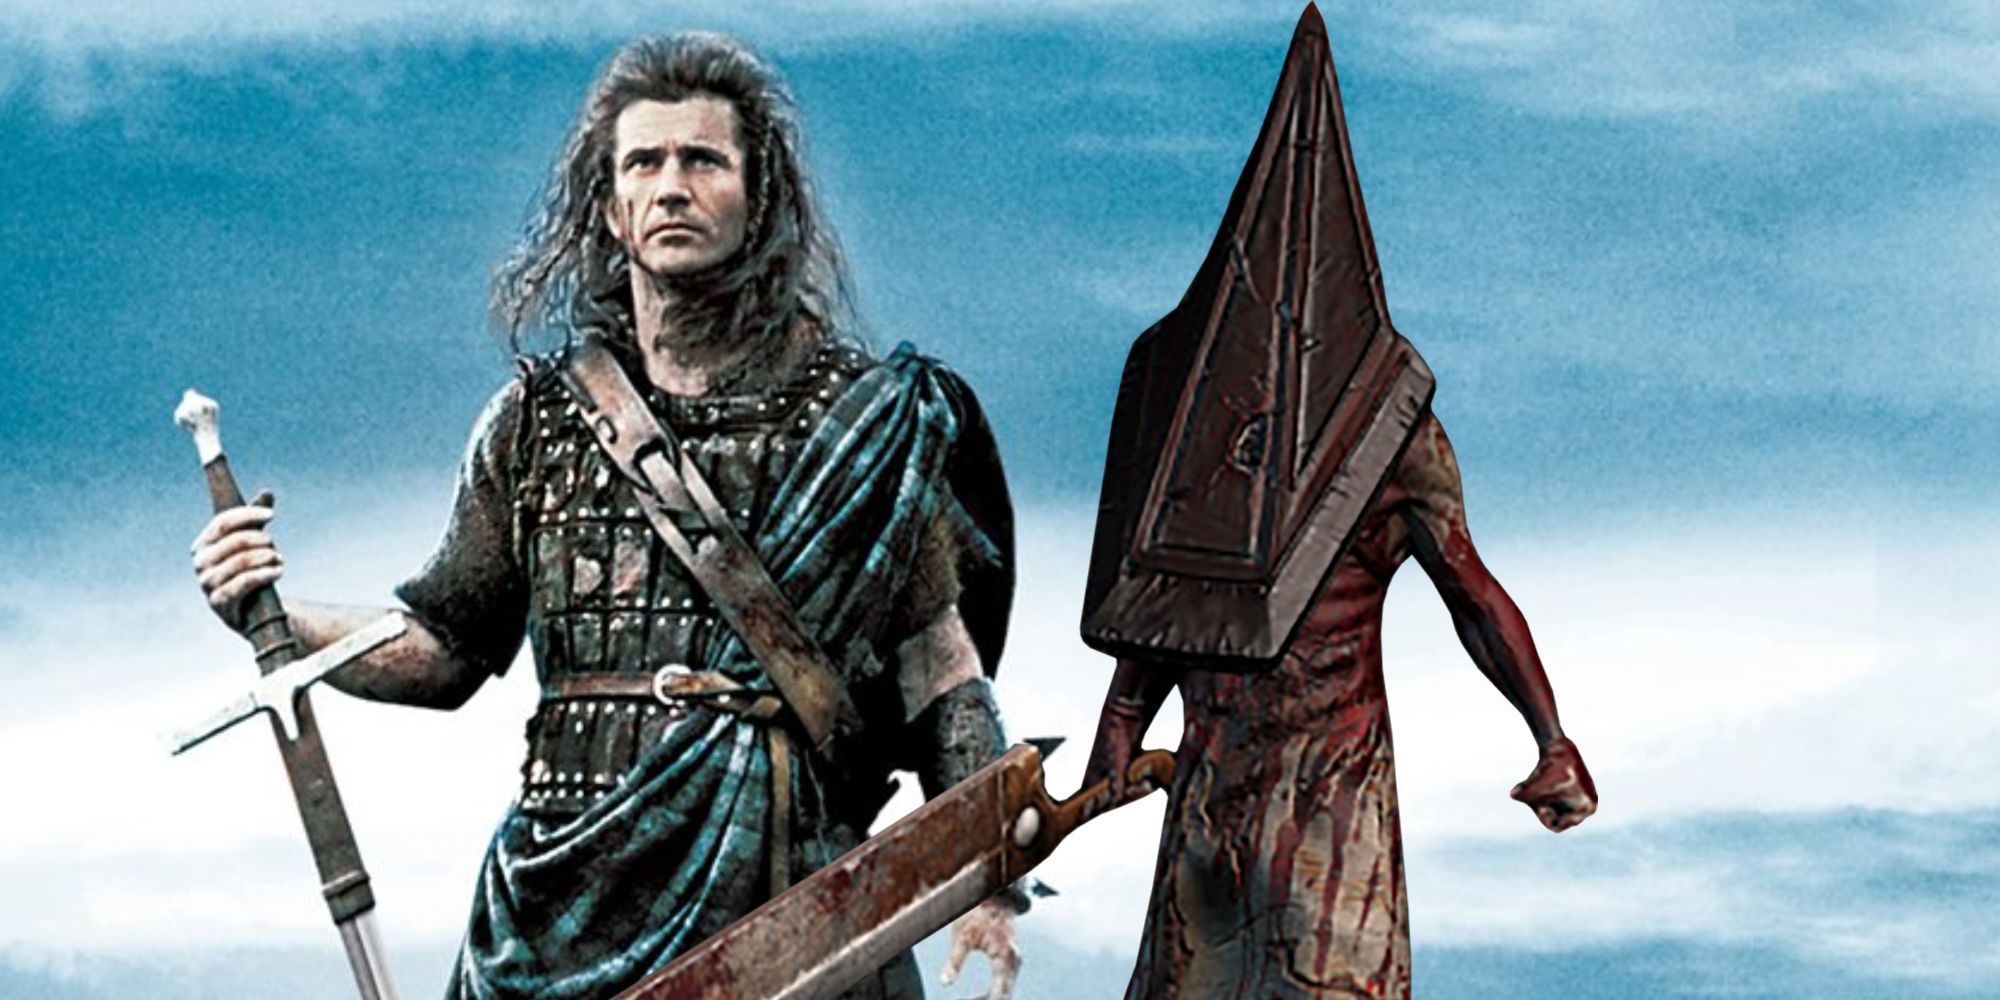 Braveheart's Mel Gibson beside image of Pyramid Head from Silent Hill 2